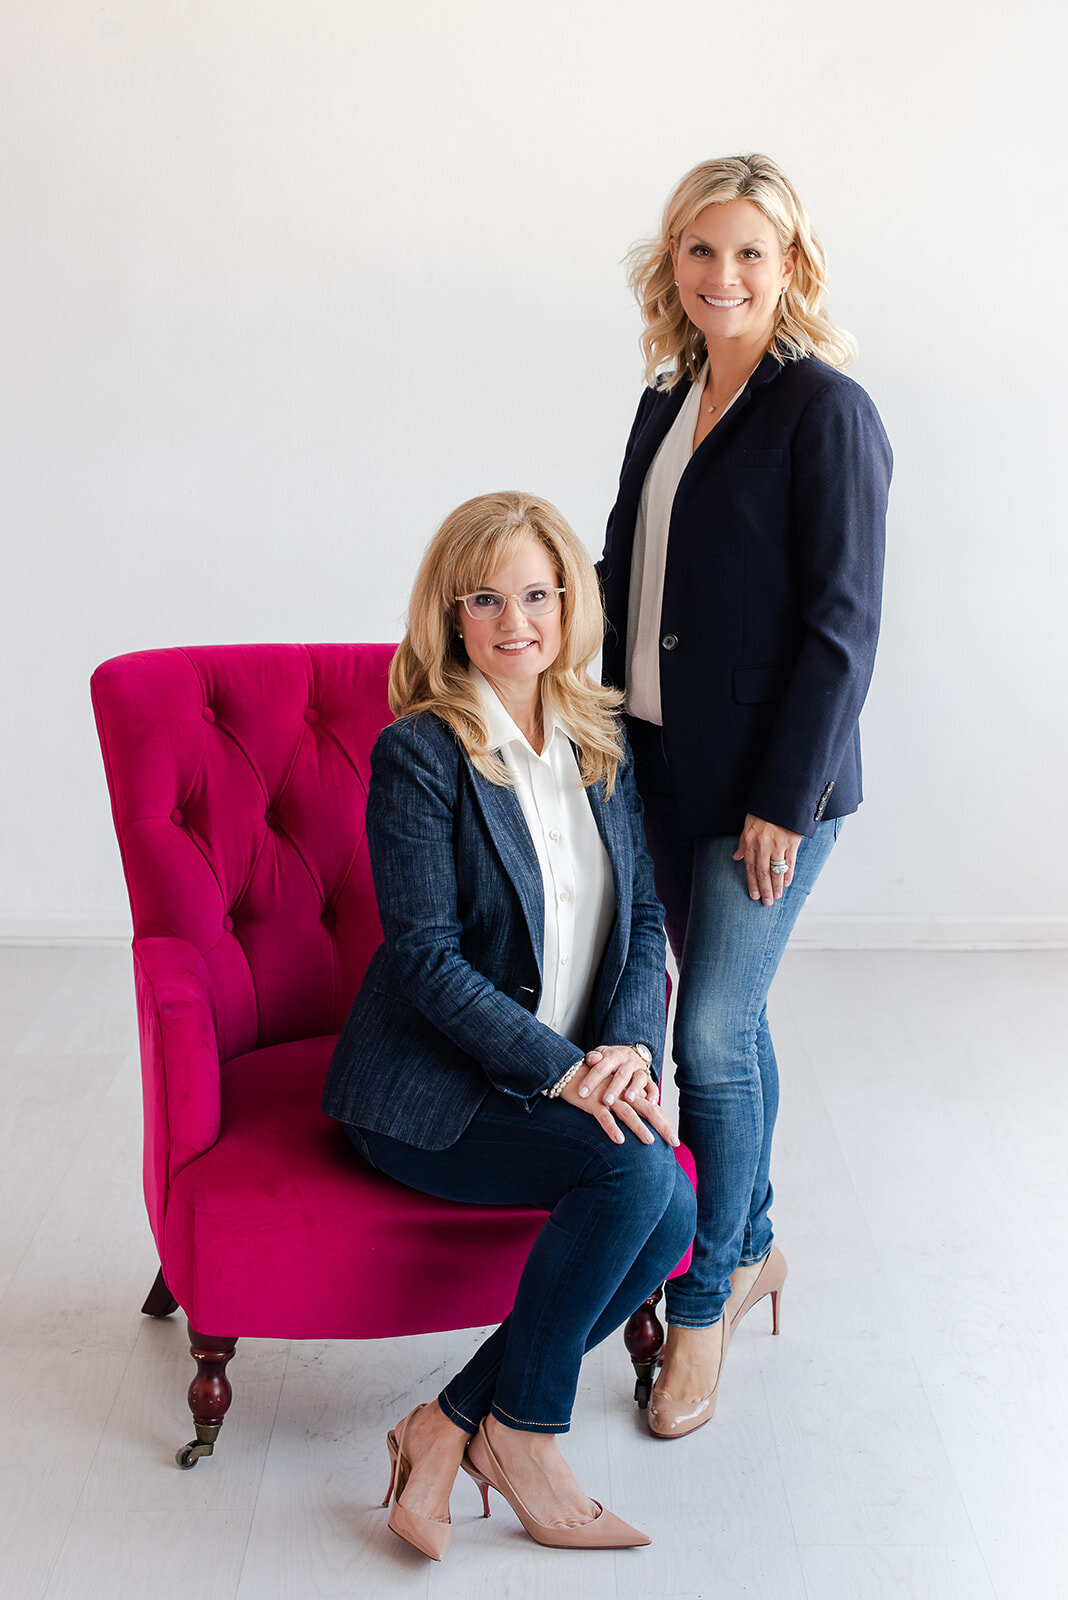 Modern headshot for two females one sitting on pink chair one standing